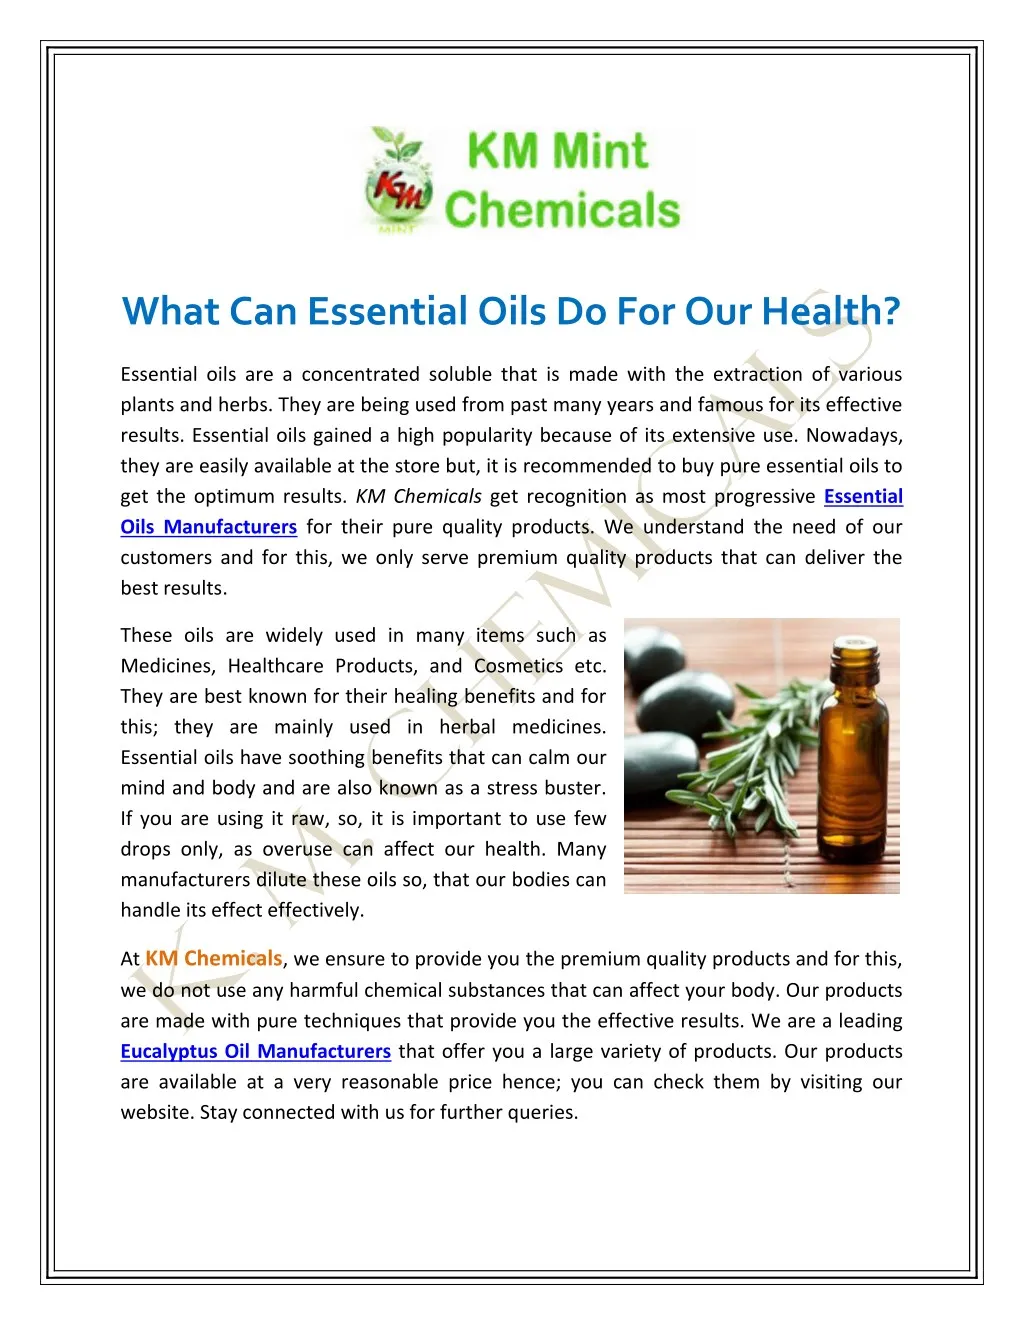 what can essential oils do for our health